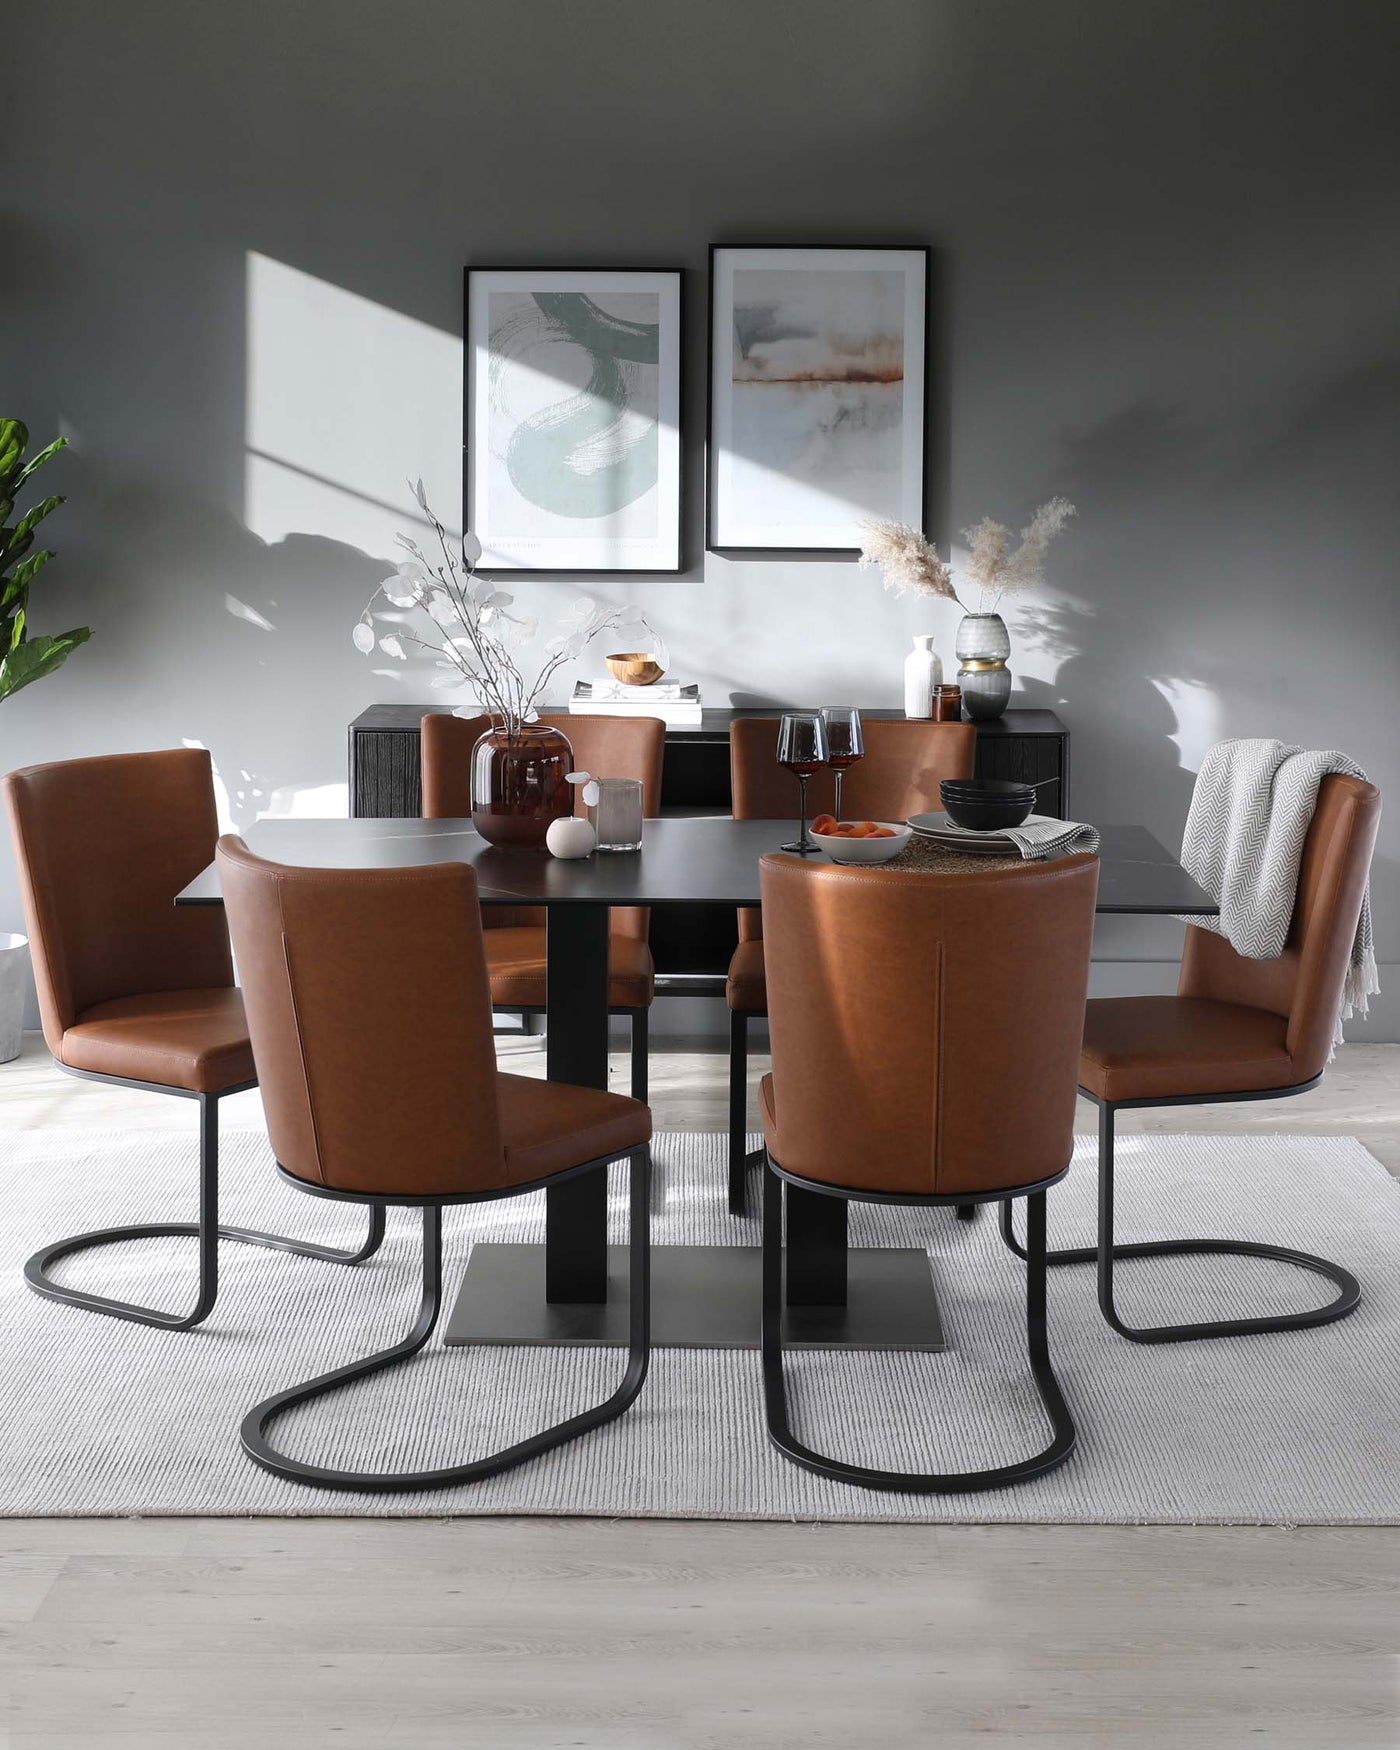 A modern dining room set with a sleek black rectangular table and four matching armchairs with curved cantilevered bases. The chairs are upholstered in a smooth caramel brown leatherette with generous cushioning. The set rests on a textured light grey area rug, accentuating the contemporary design.